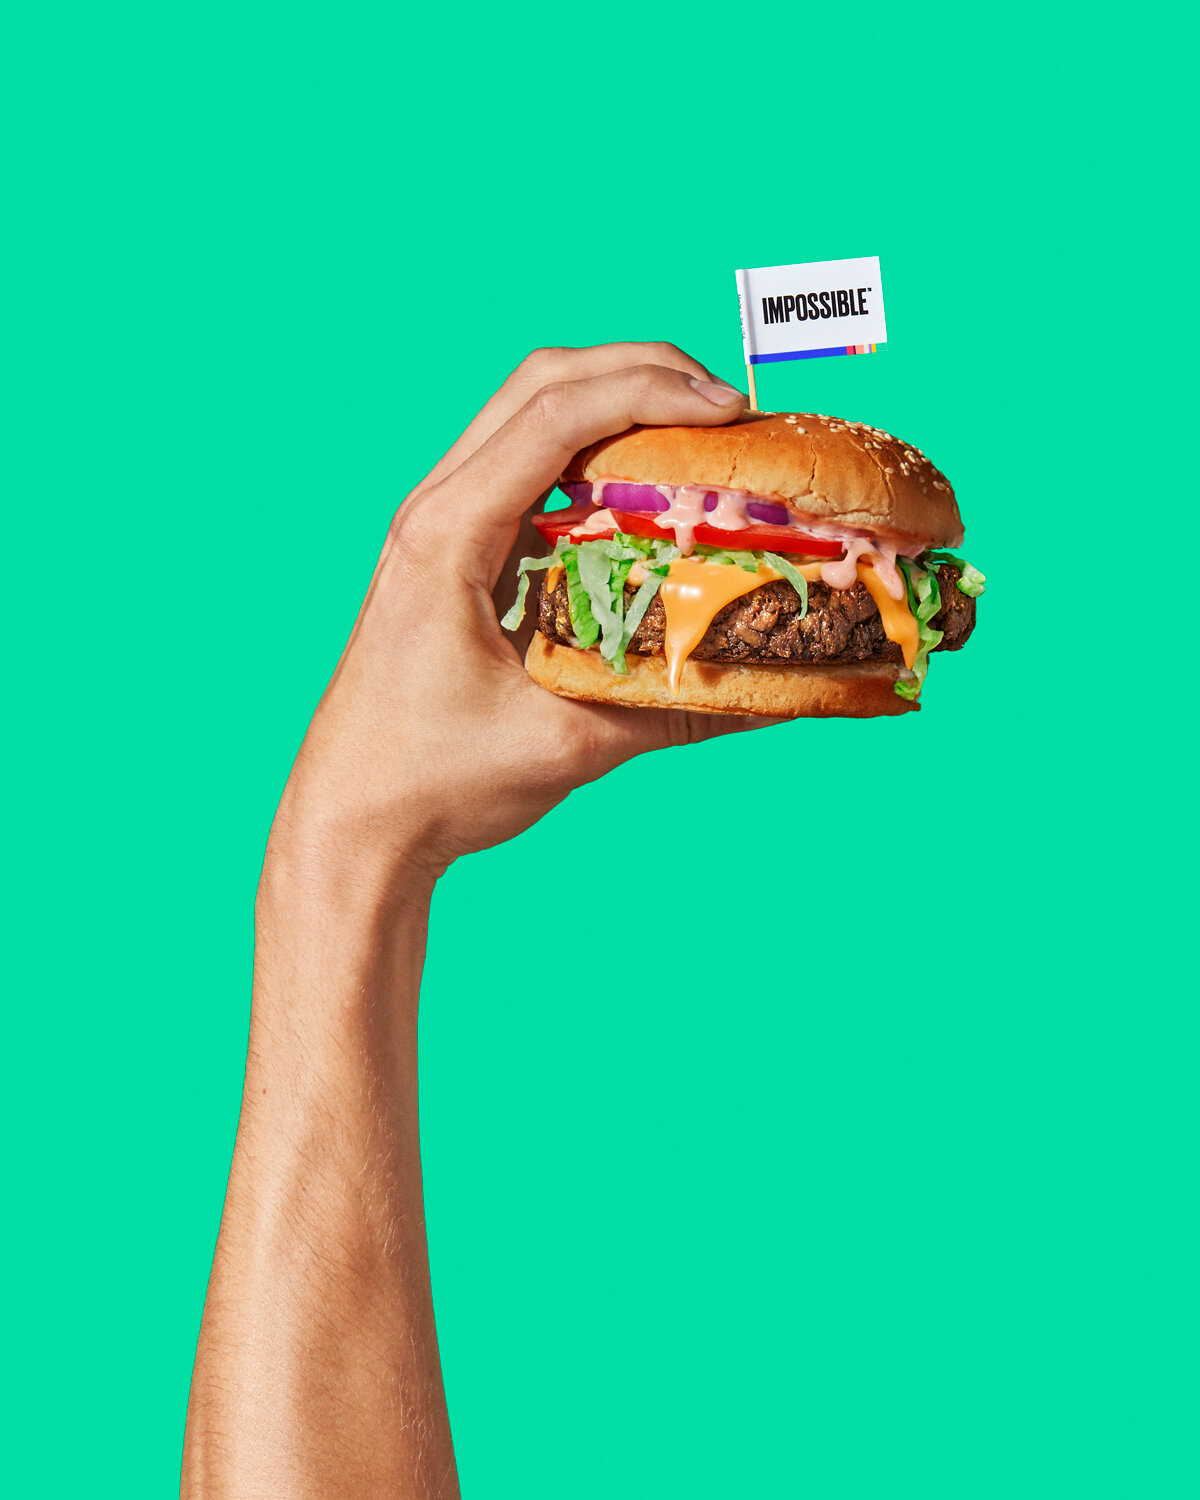 180514_IMPOSSIBLE_FOODS_PRODUCT_BURGER-EVERYWHERE_2159-v3.crop.jpg